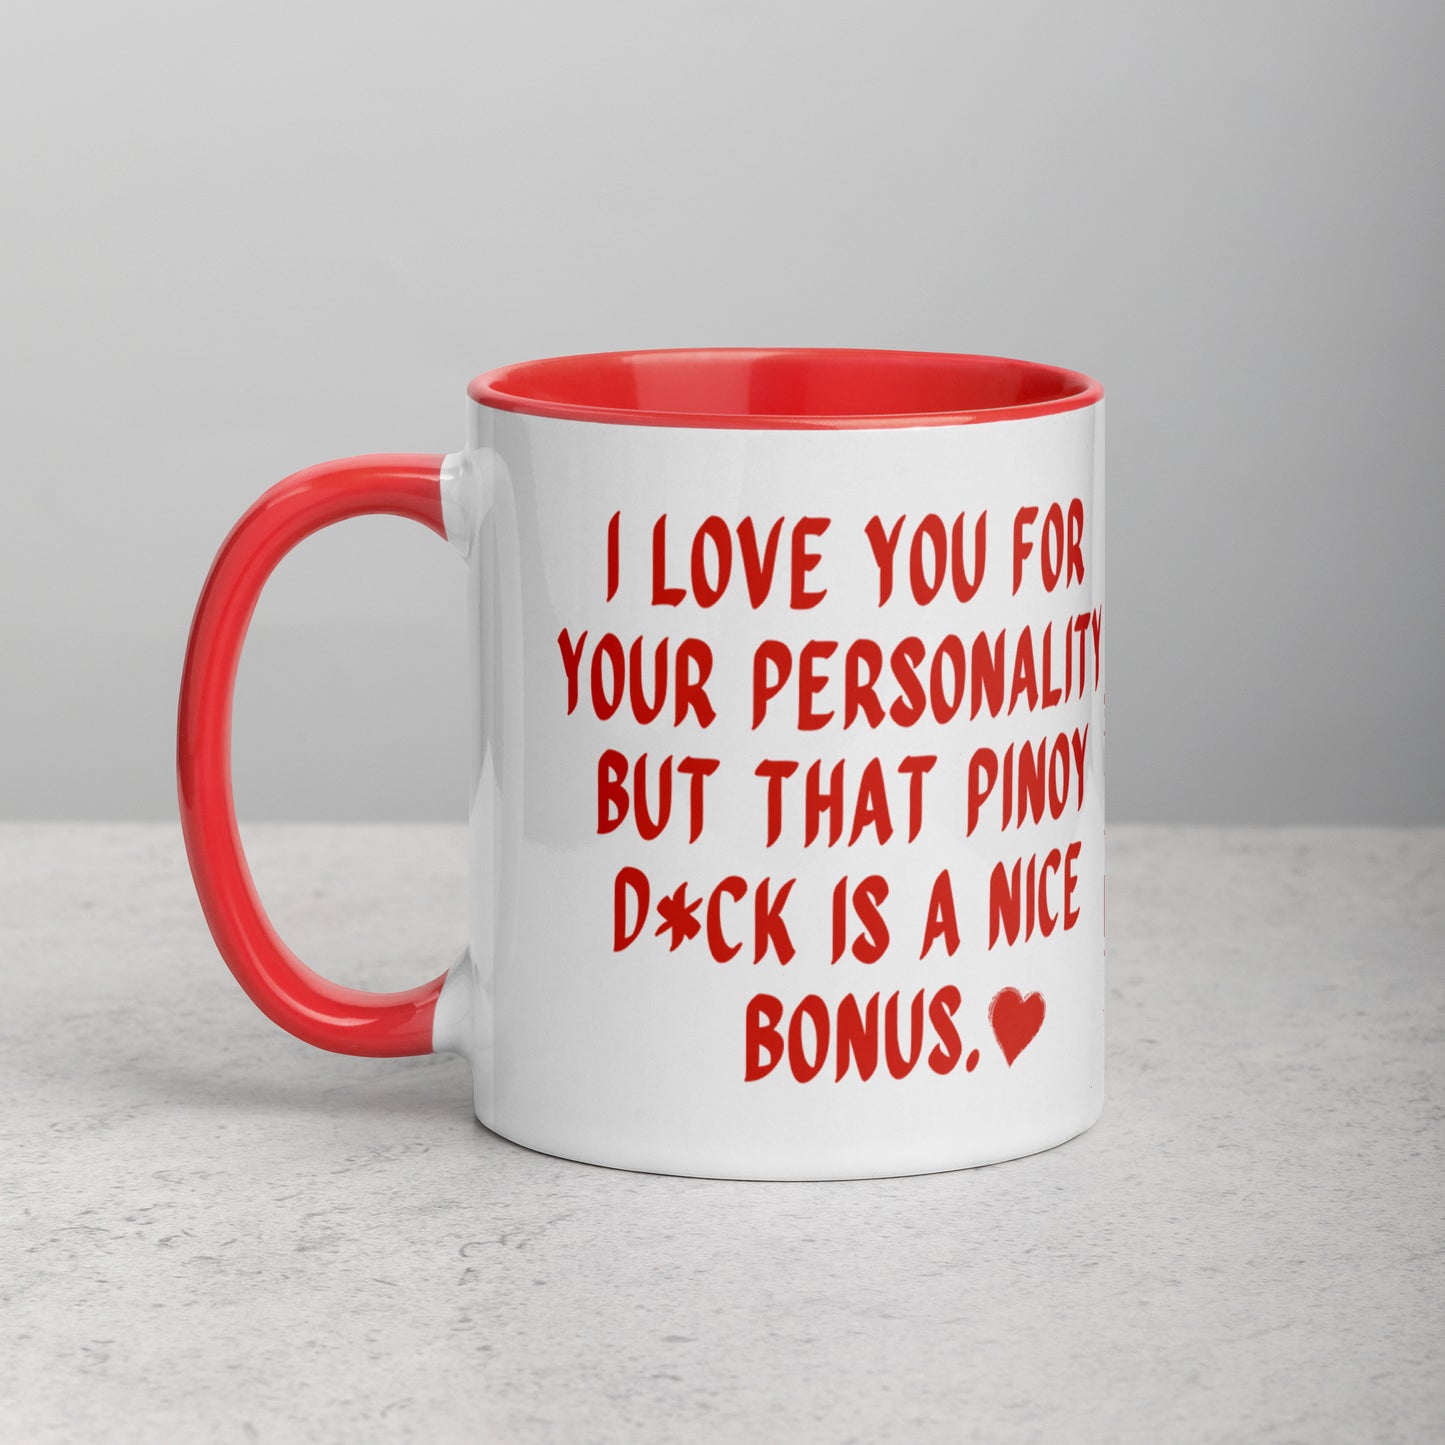 Left view of the I Love You For Your Personality Funny Pinoy Valentine's Day Mug.